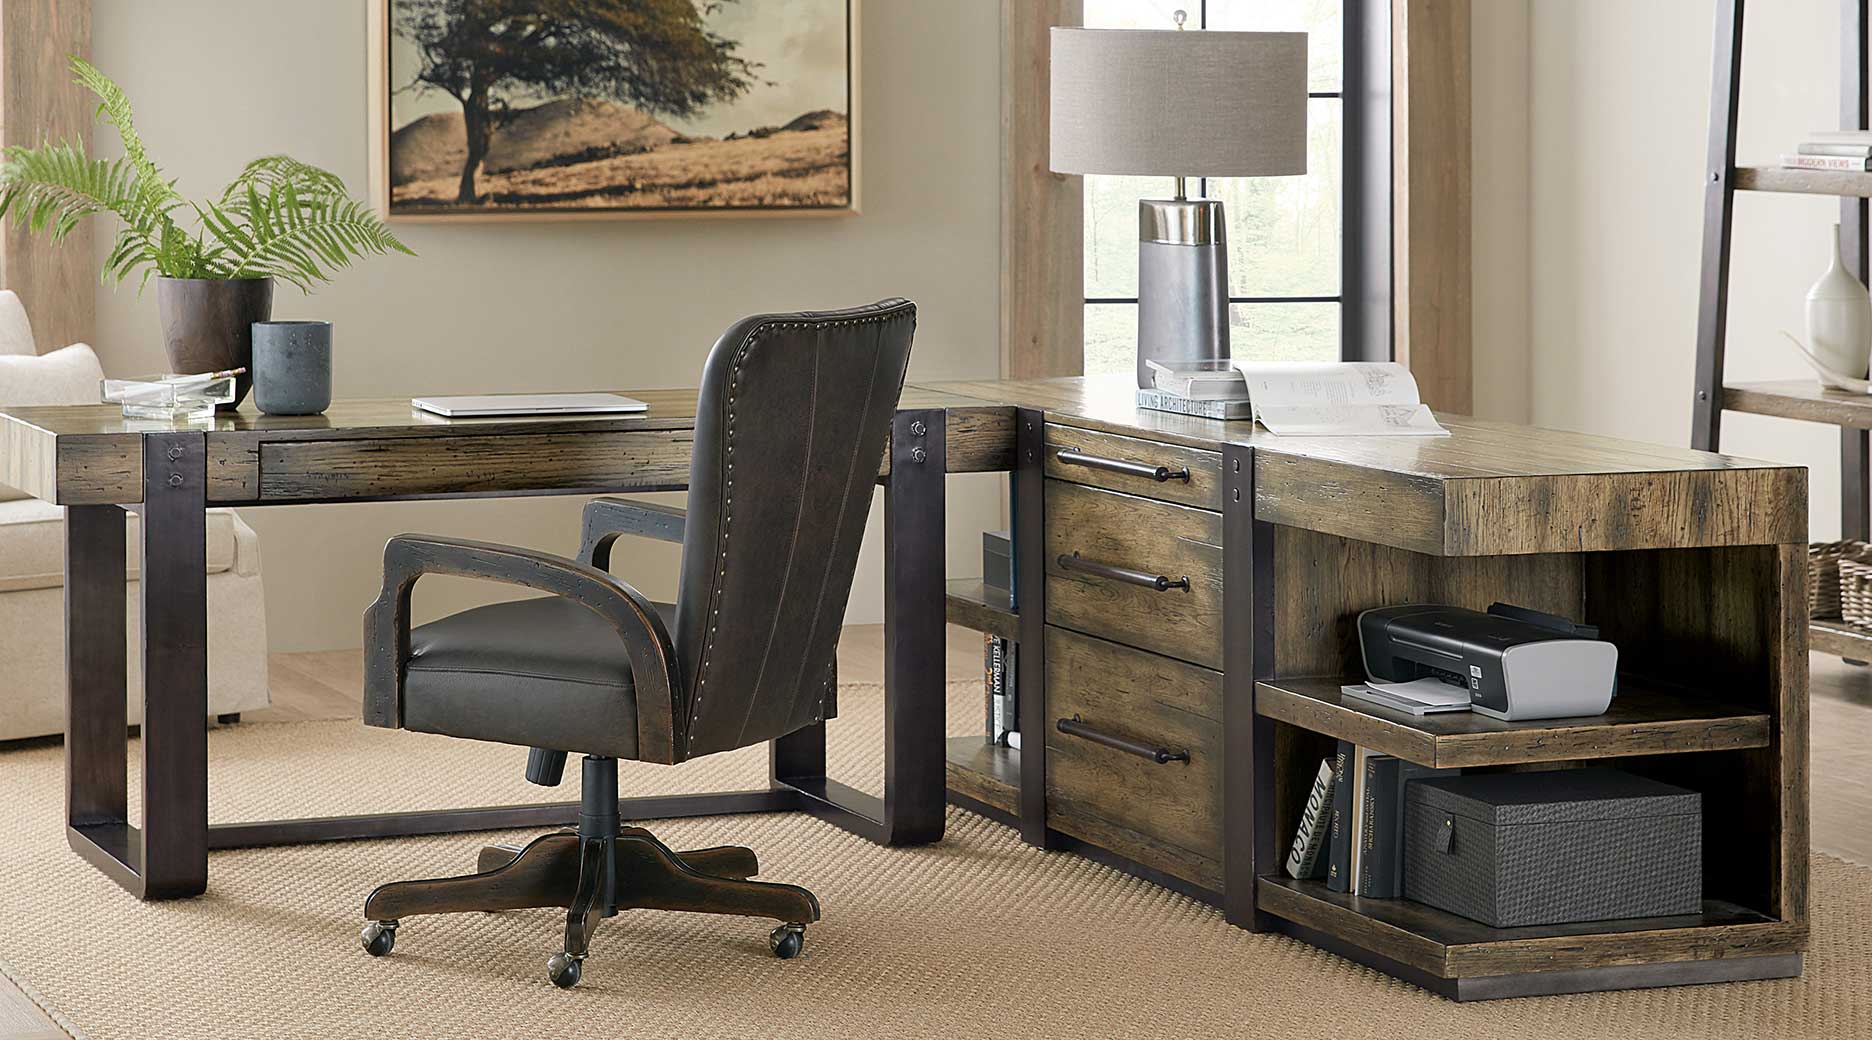 Hooker Furniture home office furniture display symbolic of the New Normal work-at-home